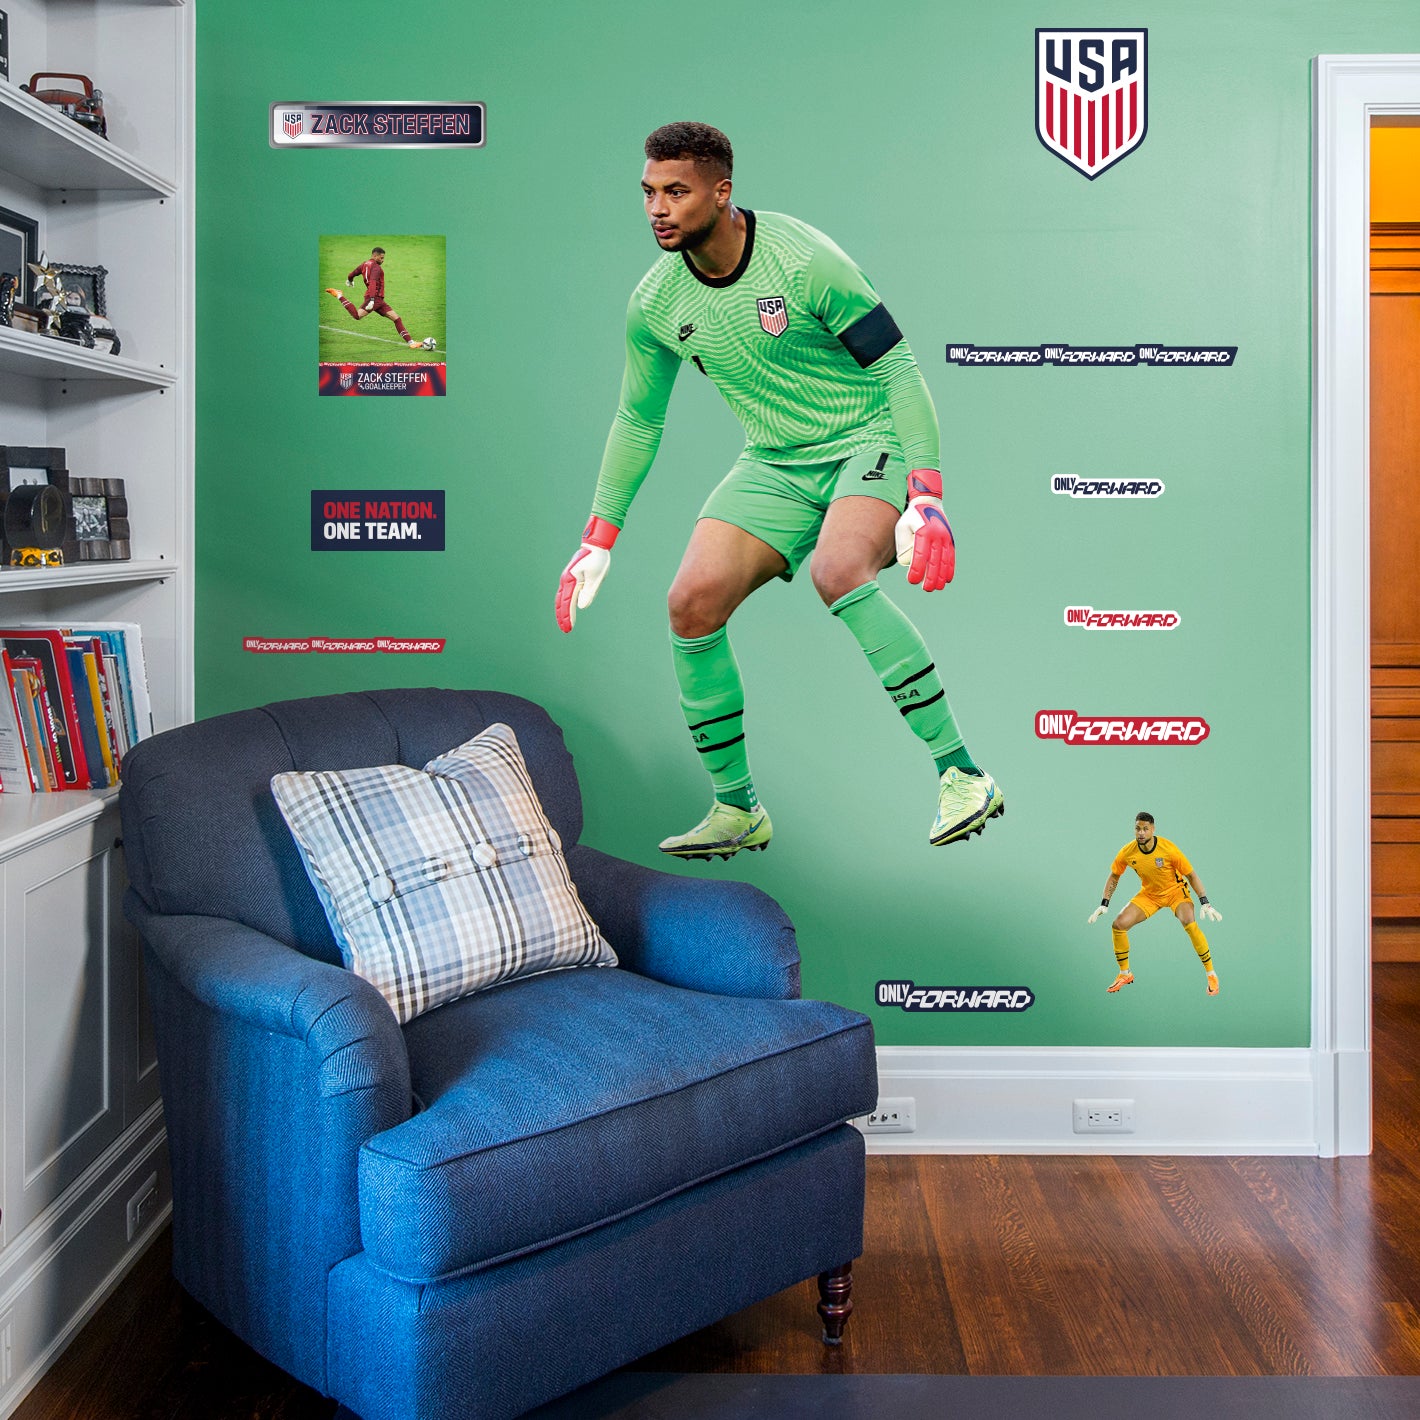 Life-Size Character +10 Decals  (47"W x 78"H) 